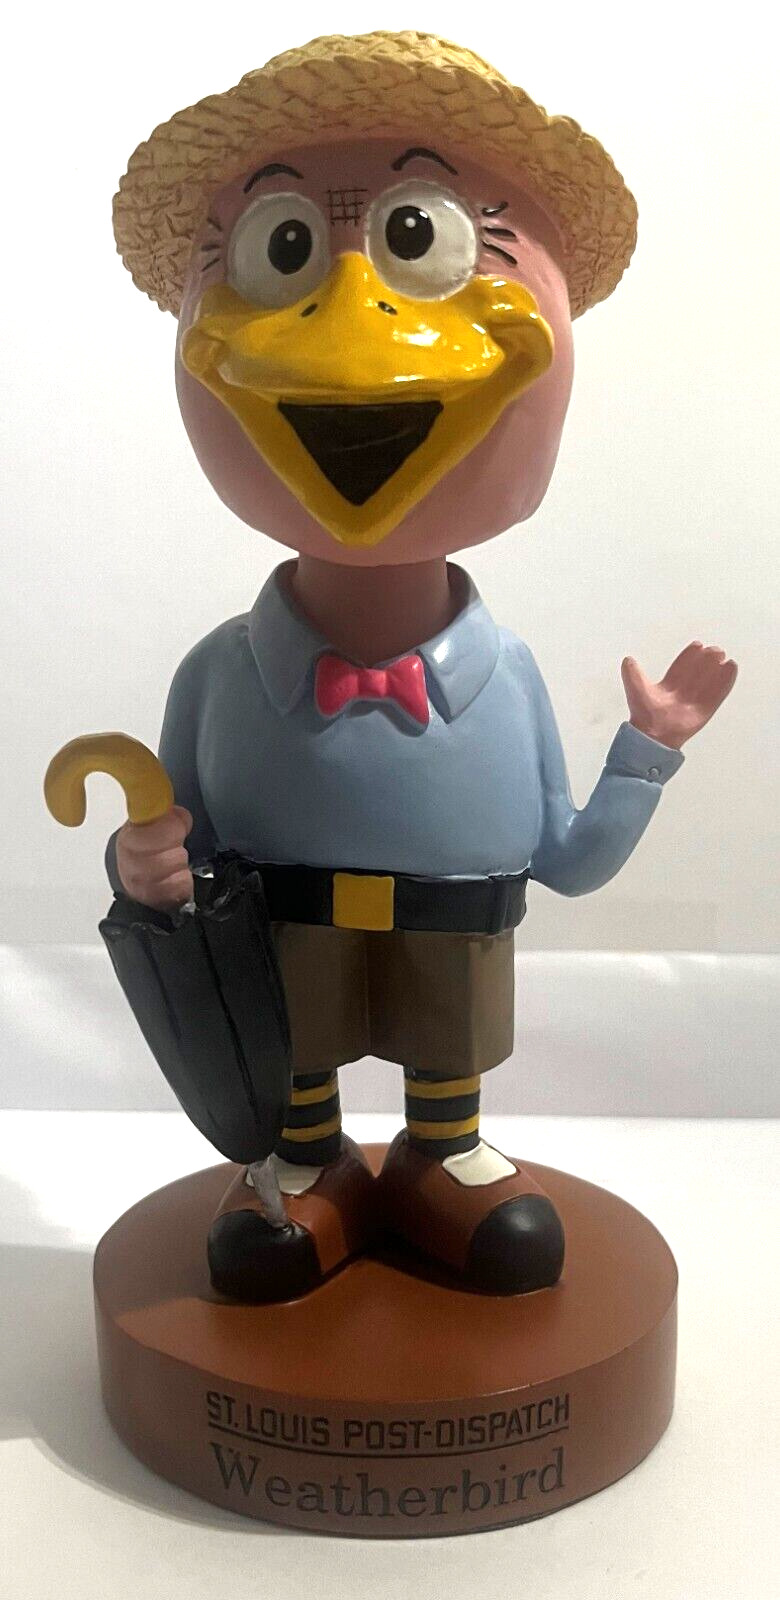 ST LOUIS-DISPATCH Newspaper Collectible Figure Weatherbird Bobblehead 7 in. Tall